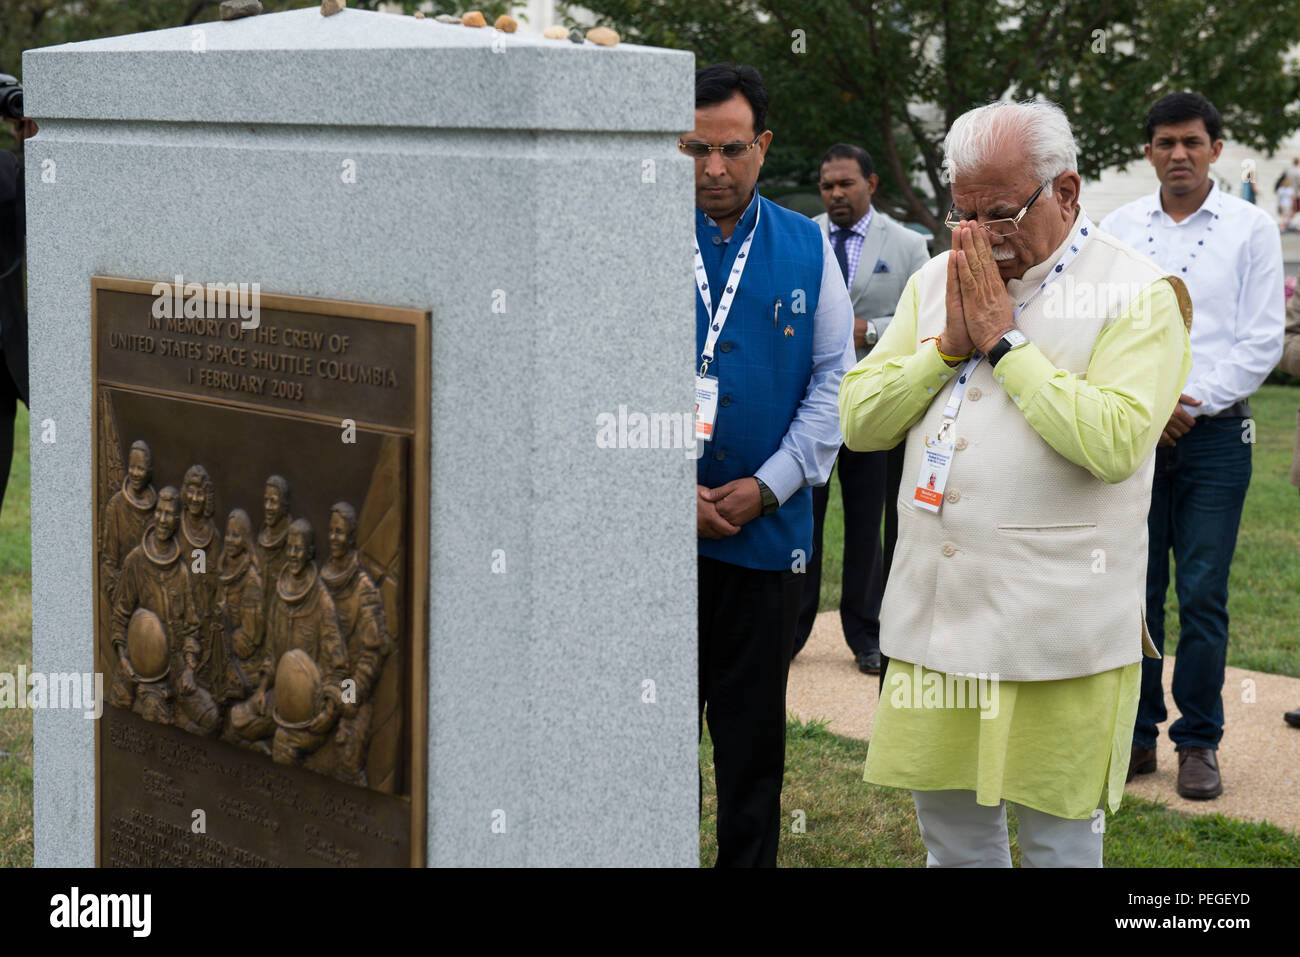 Chief Minister of Haryana, India Manohar Lal Khattar takes part in a wreath-laying ceremony at the Space Shuttle Columbia Memorial near the Memorial Amphitheater in Arlington National Cemetery, Aug. 18, 2015, in Arlington, Va. Kalpana Chawla, one of seven crew members killed during the Columbia disaster, was born in Karnal, India and was posthumously awarded the Congressional Space Medal of Honor, the NASA Space Flight Medal, and the NASA Distinguished Service Medal. (U.S. Army photo by Rachel Larue/released) Stock Photo